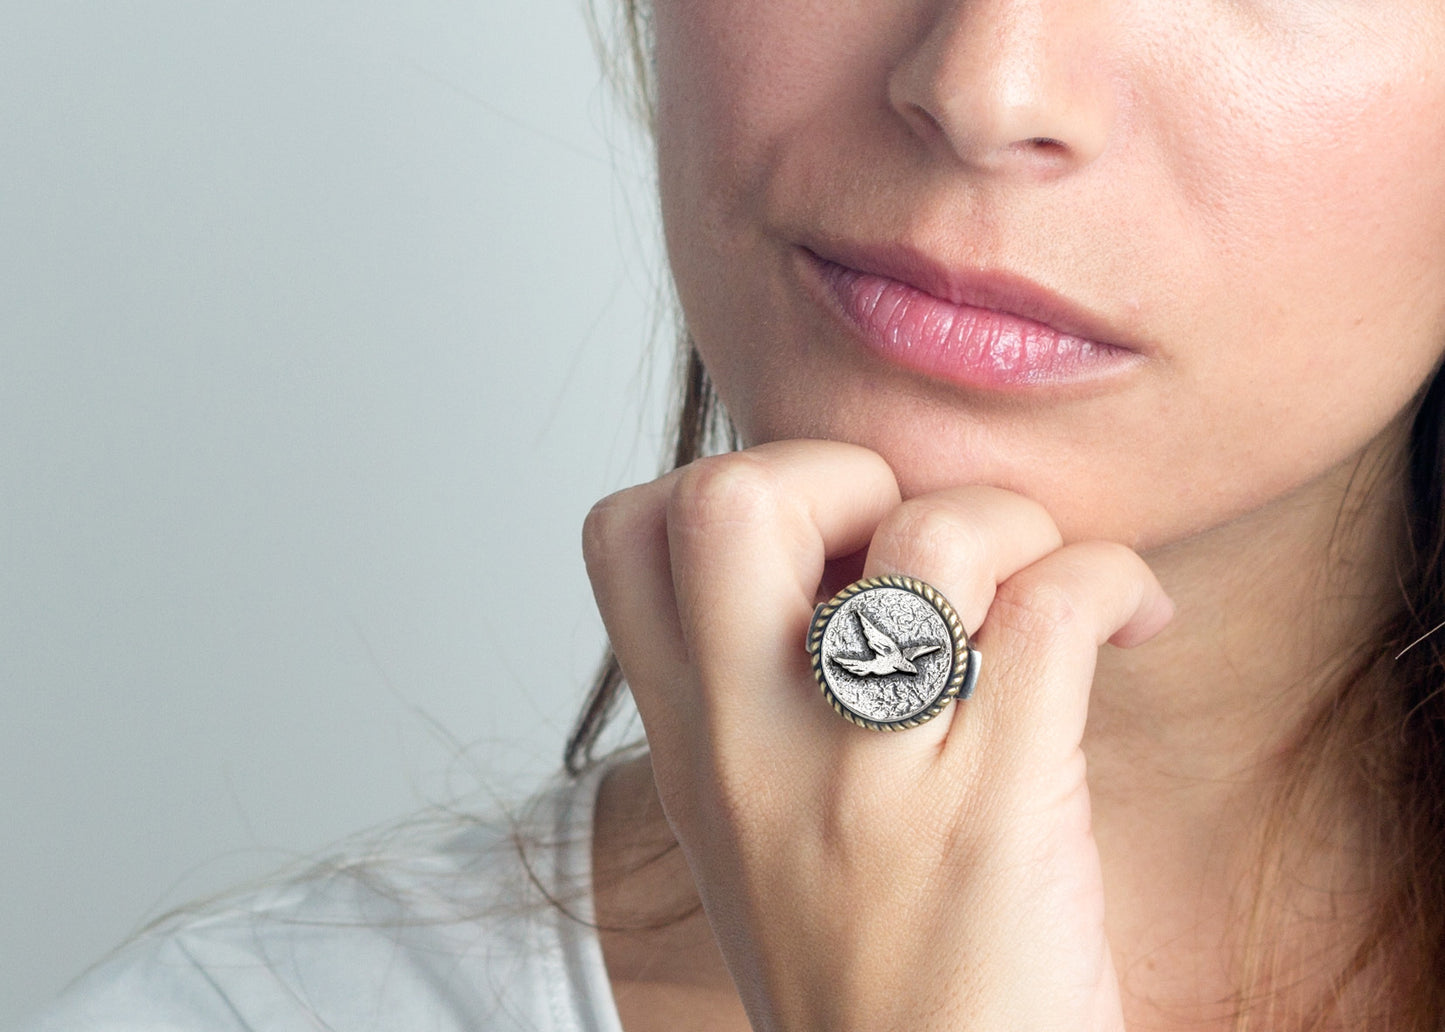 Coin ring with the bird coin medallion